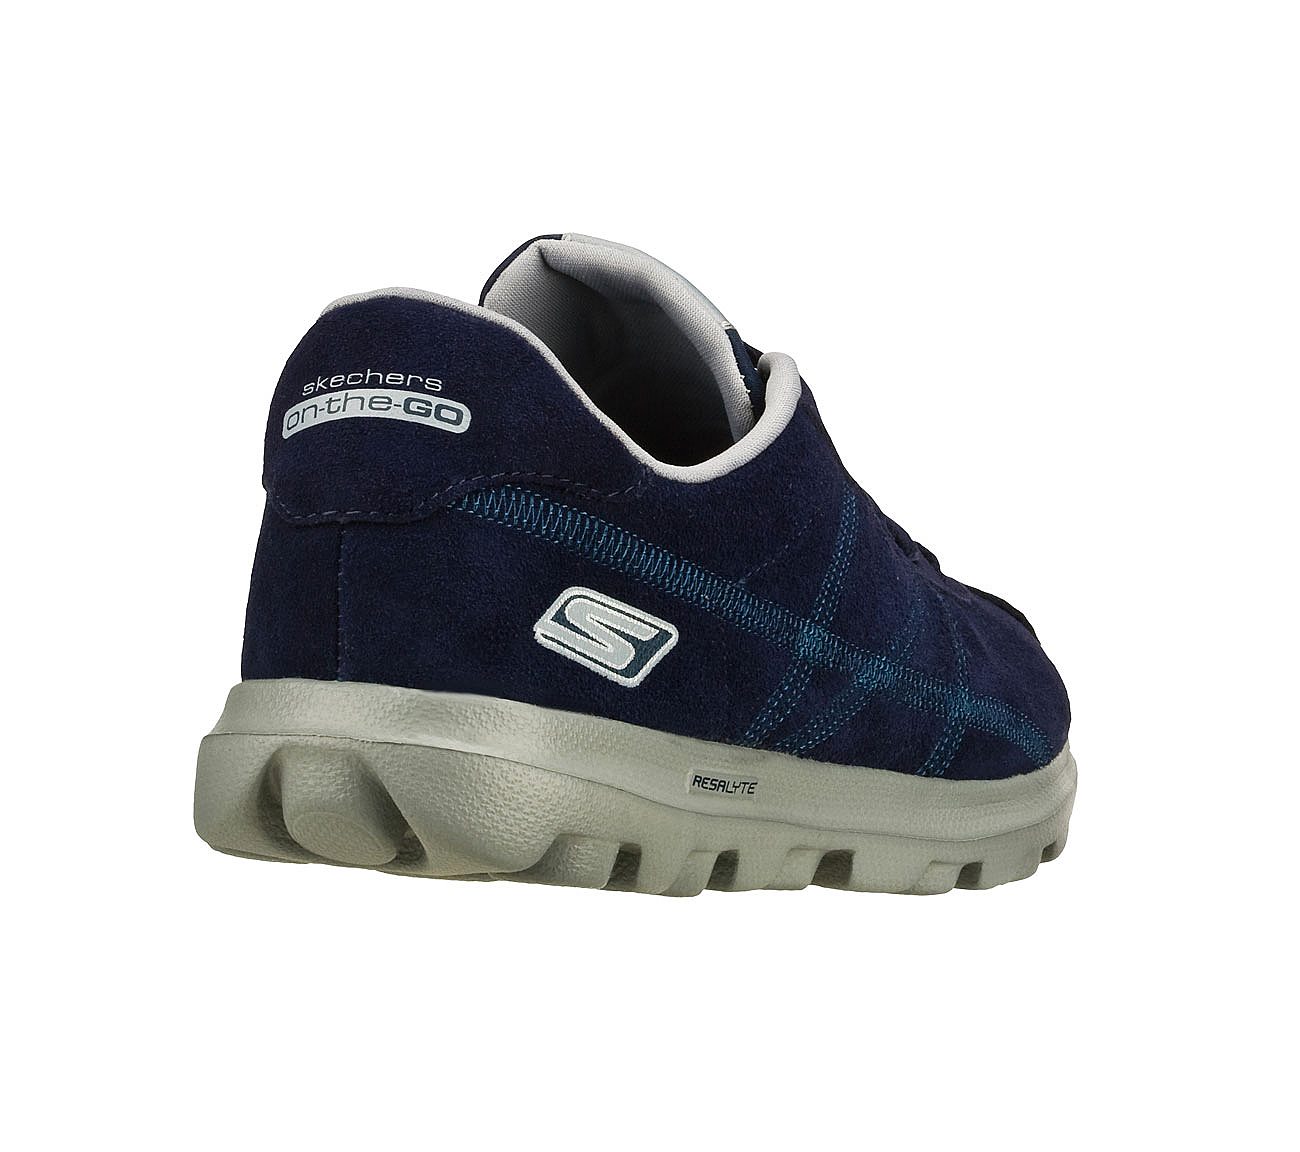 skechers on the go 53722 Off 54 